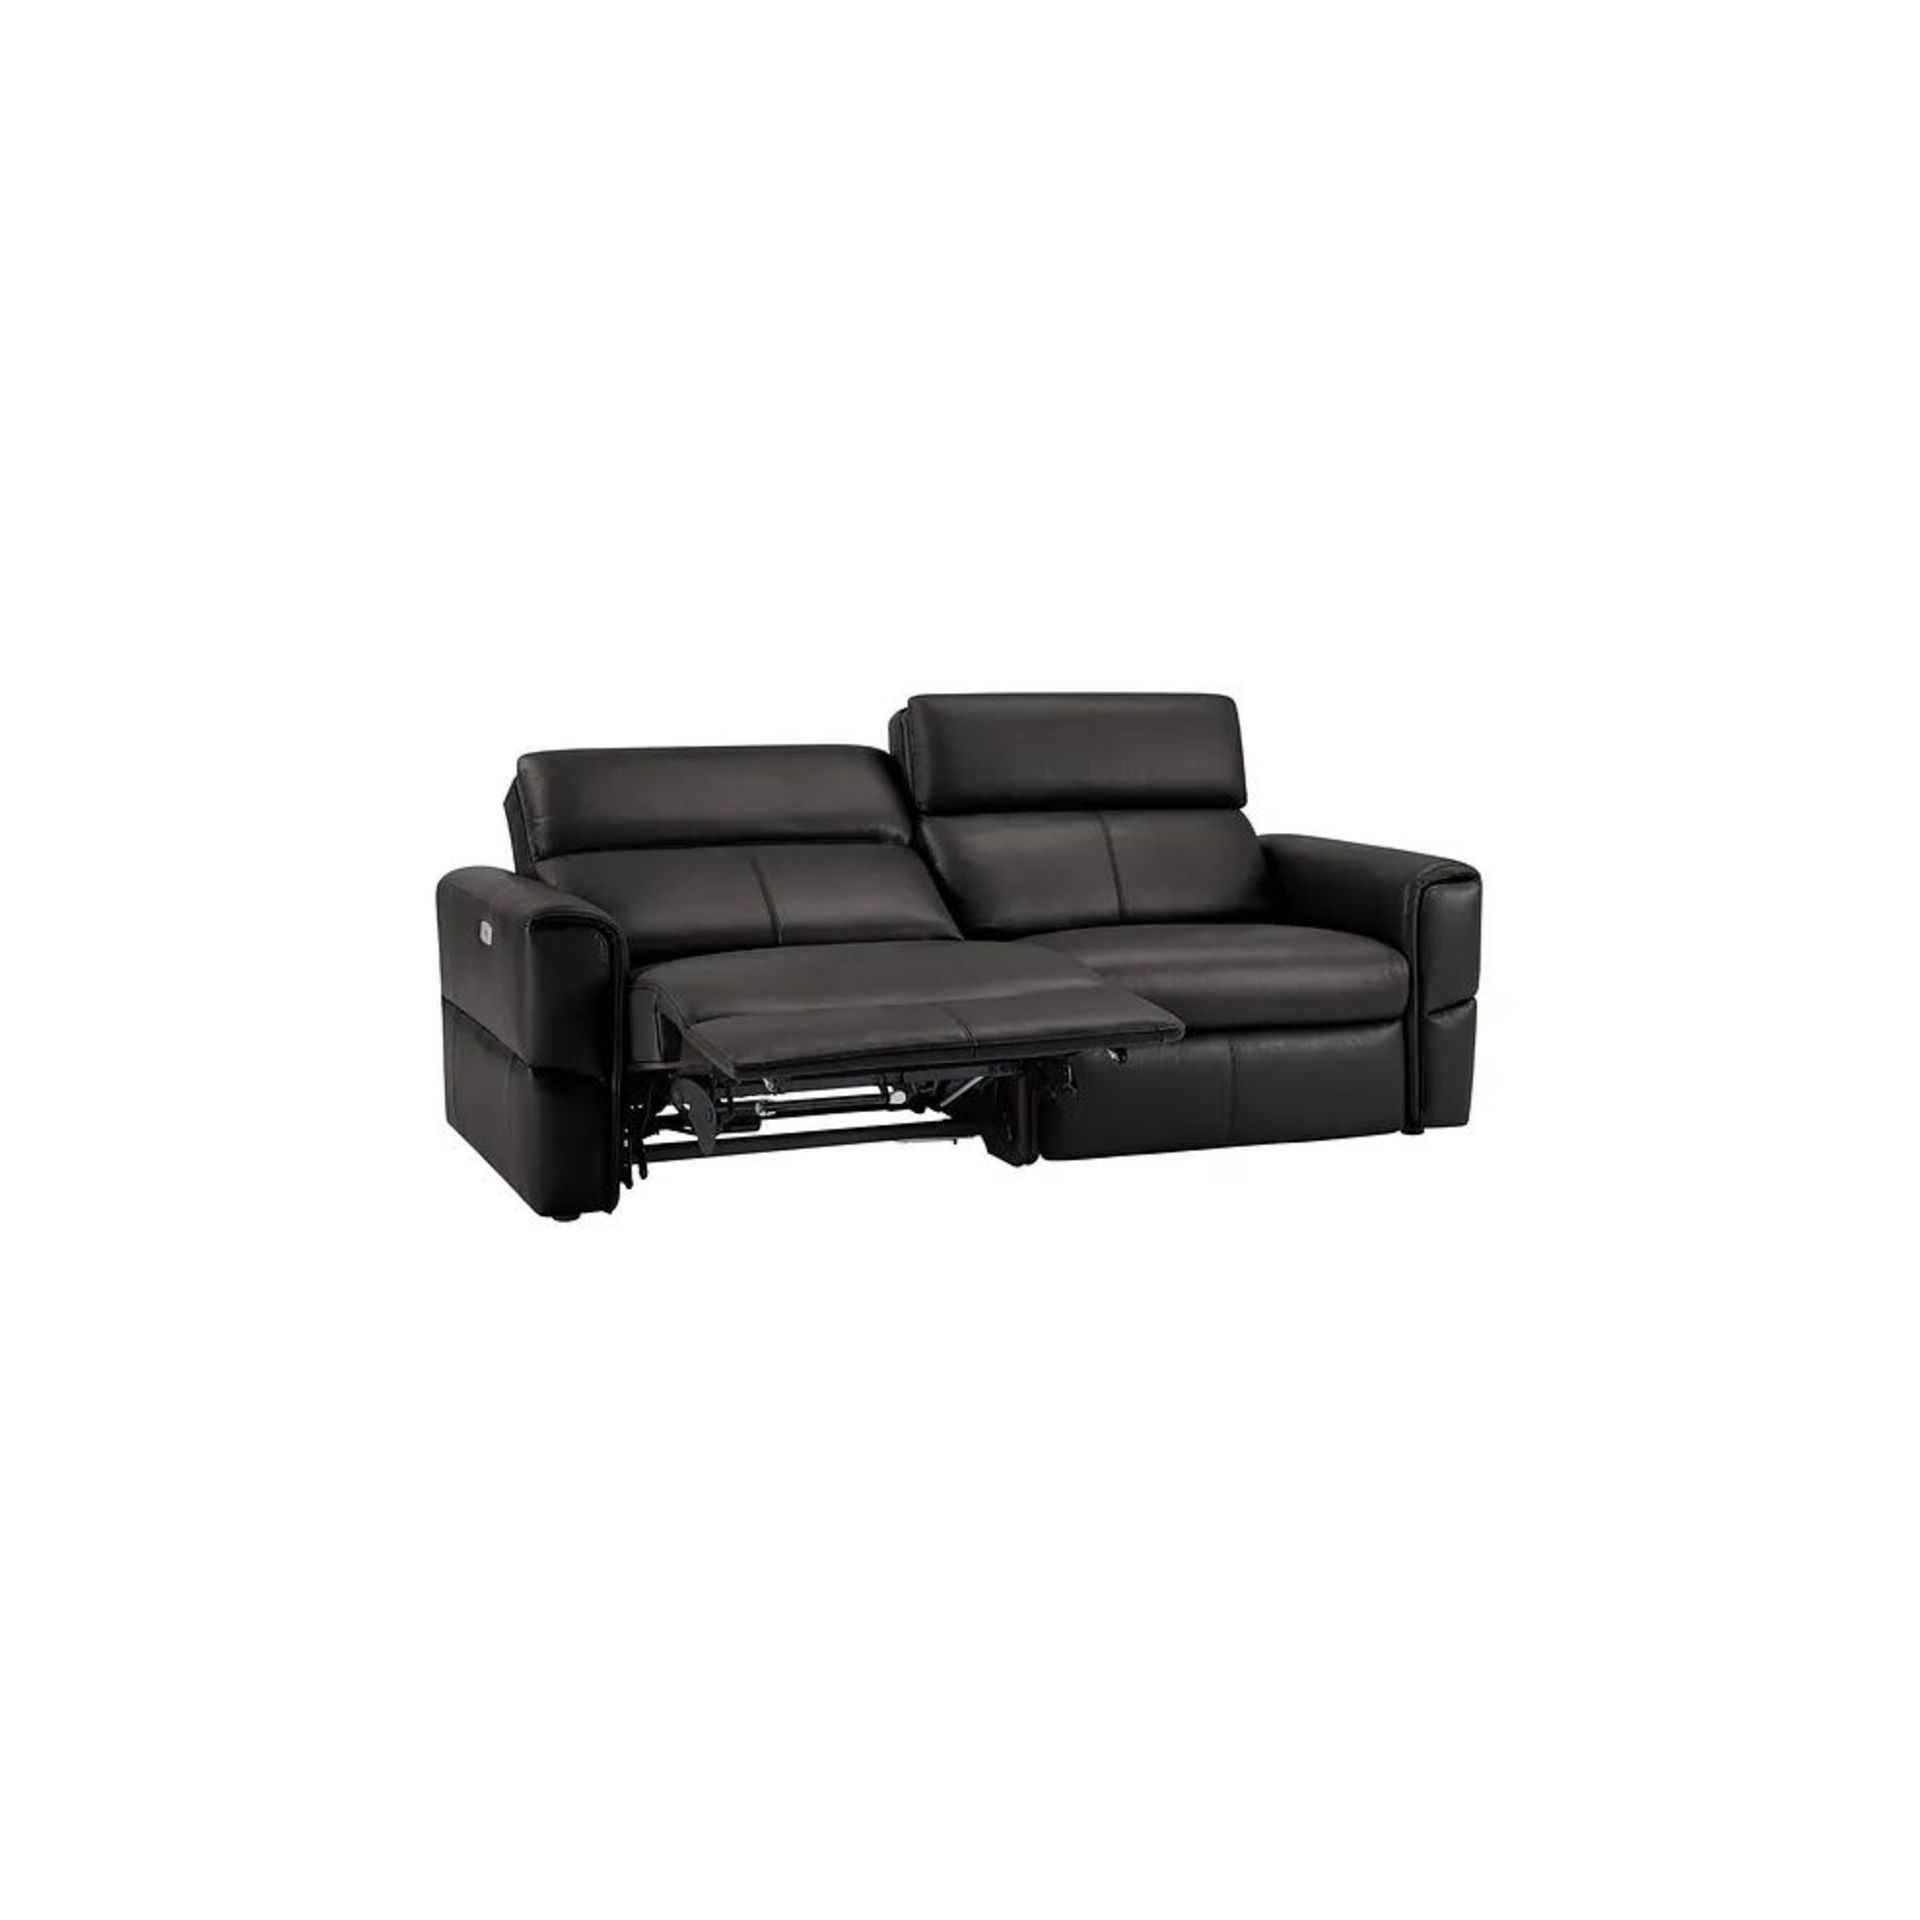 BRAND NEW SAMSON 3 Seater Electric Recliner Sofa - BLACK LEATHER. RRP £1779. Showcasing neat, modern - Image 4 of 8